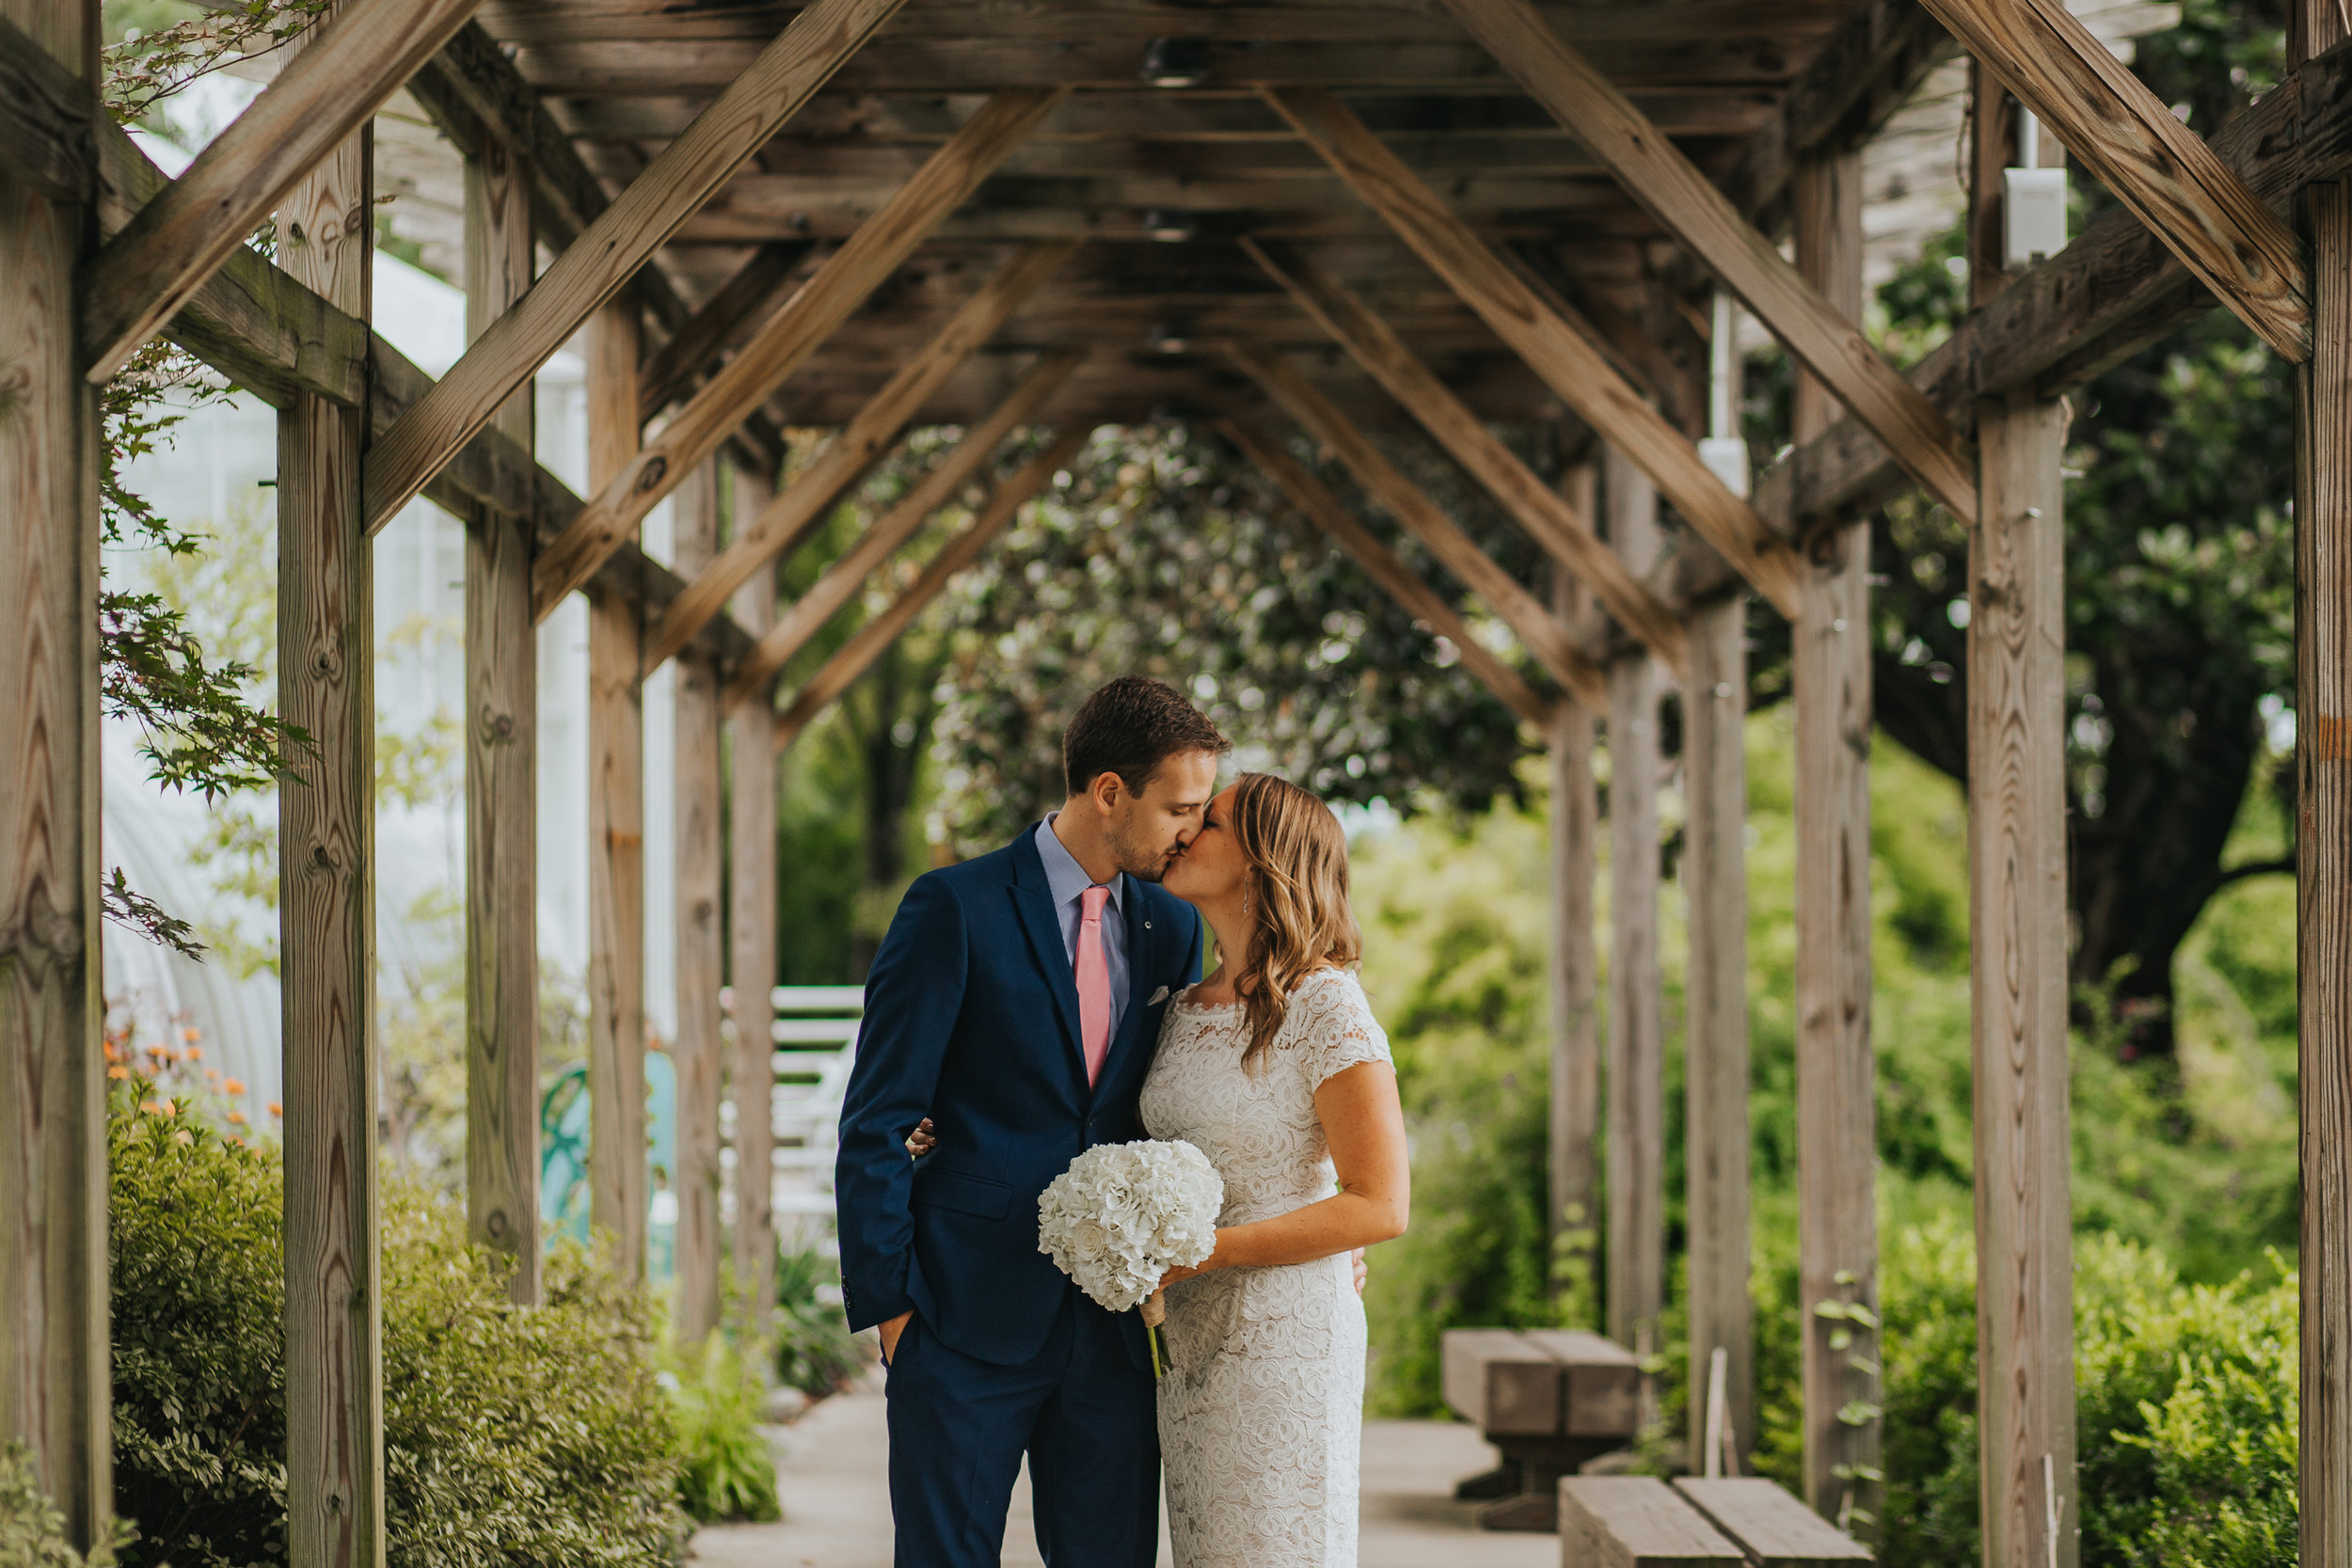  Eden Park Elopement in Cincinnati Photography by Bare Moments Photography 